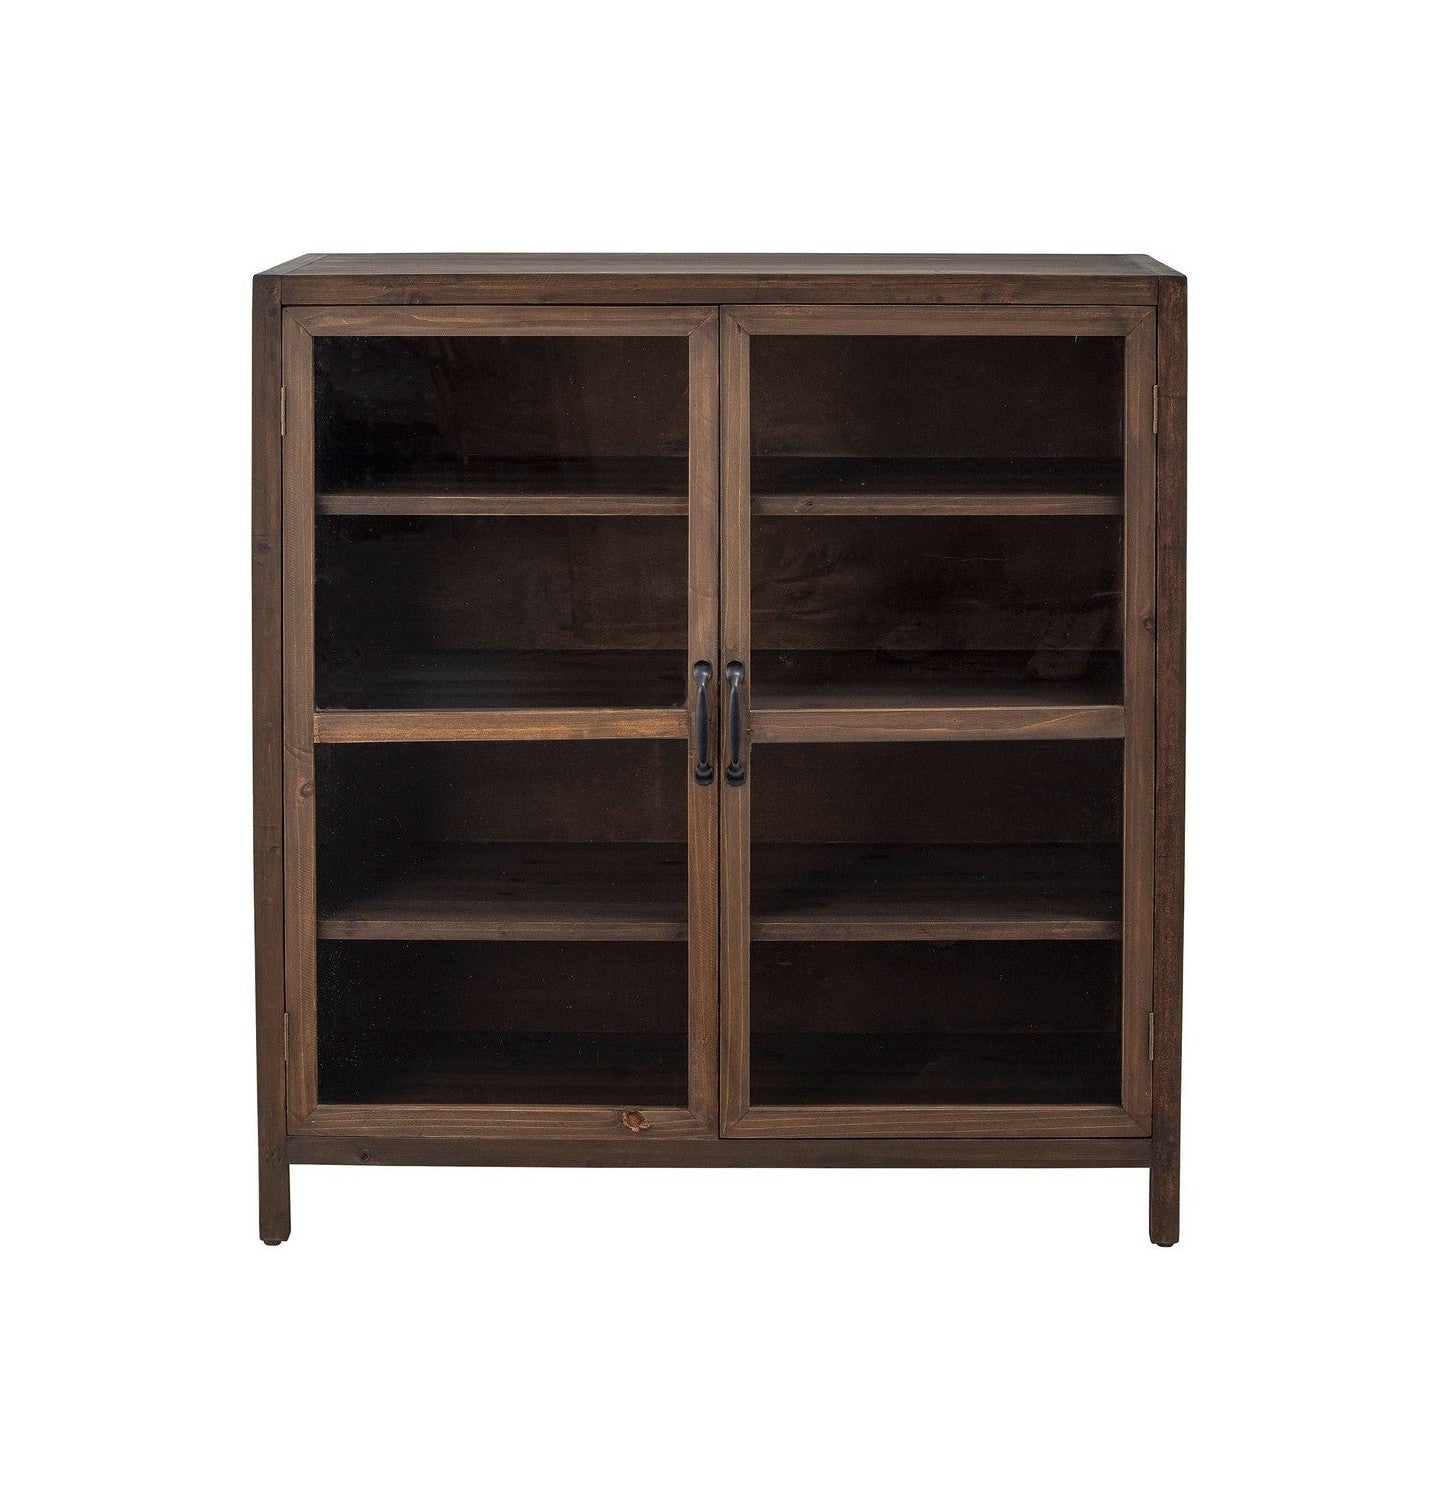 Collection créative Marl Marl Cabinet, Brown, Firwood